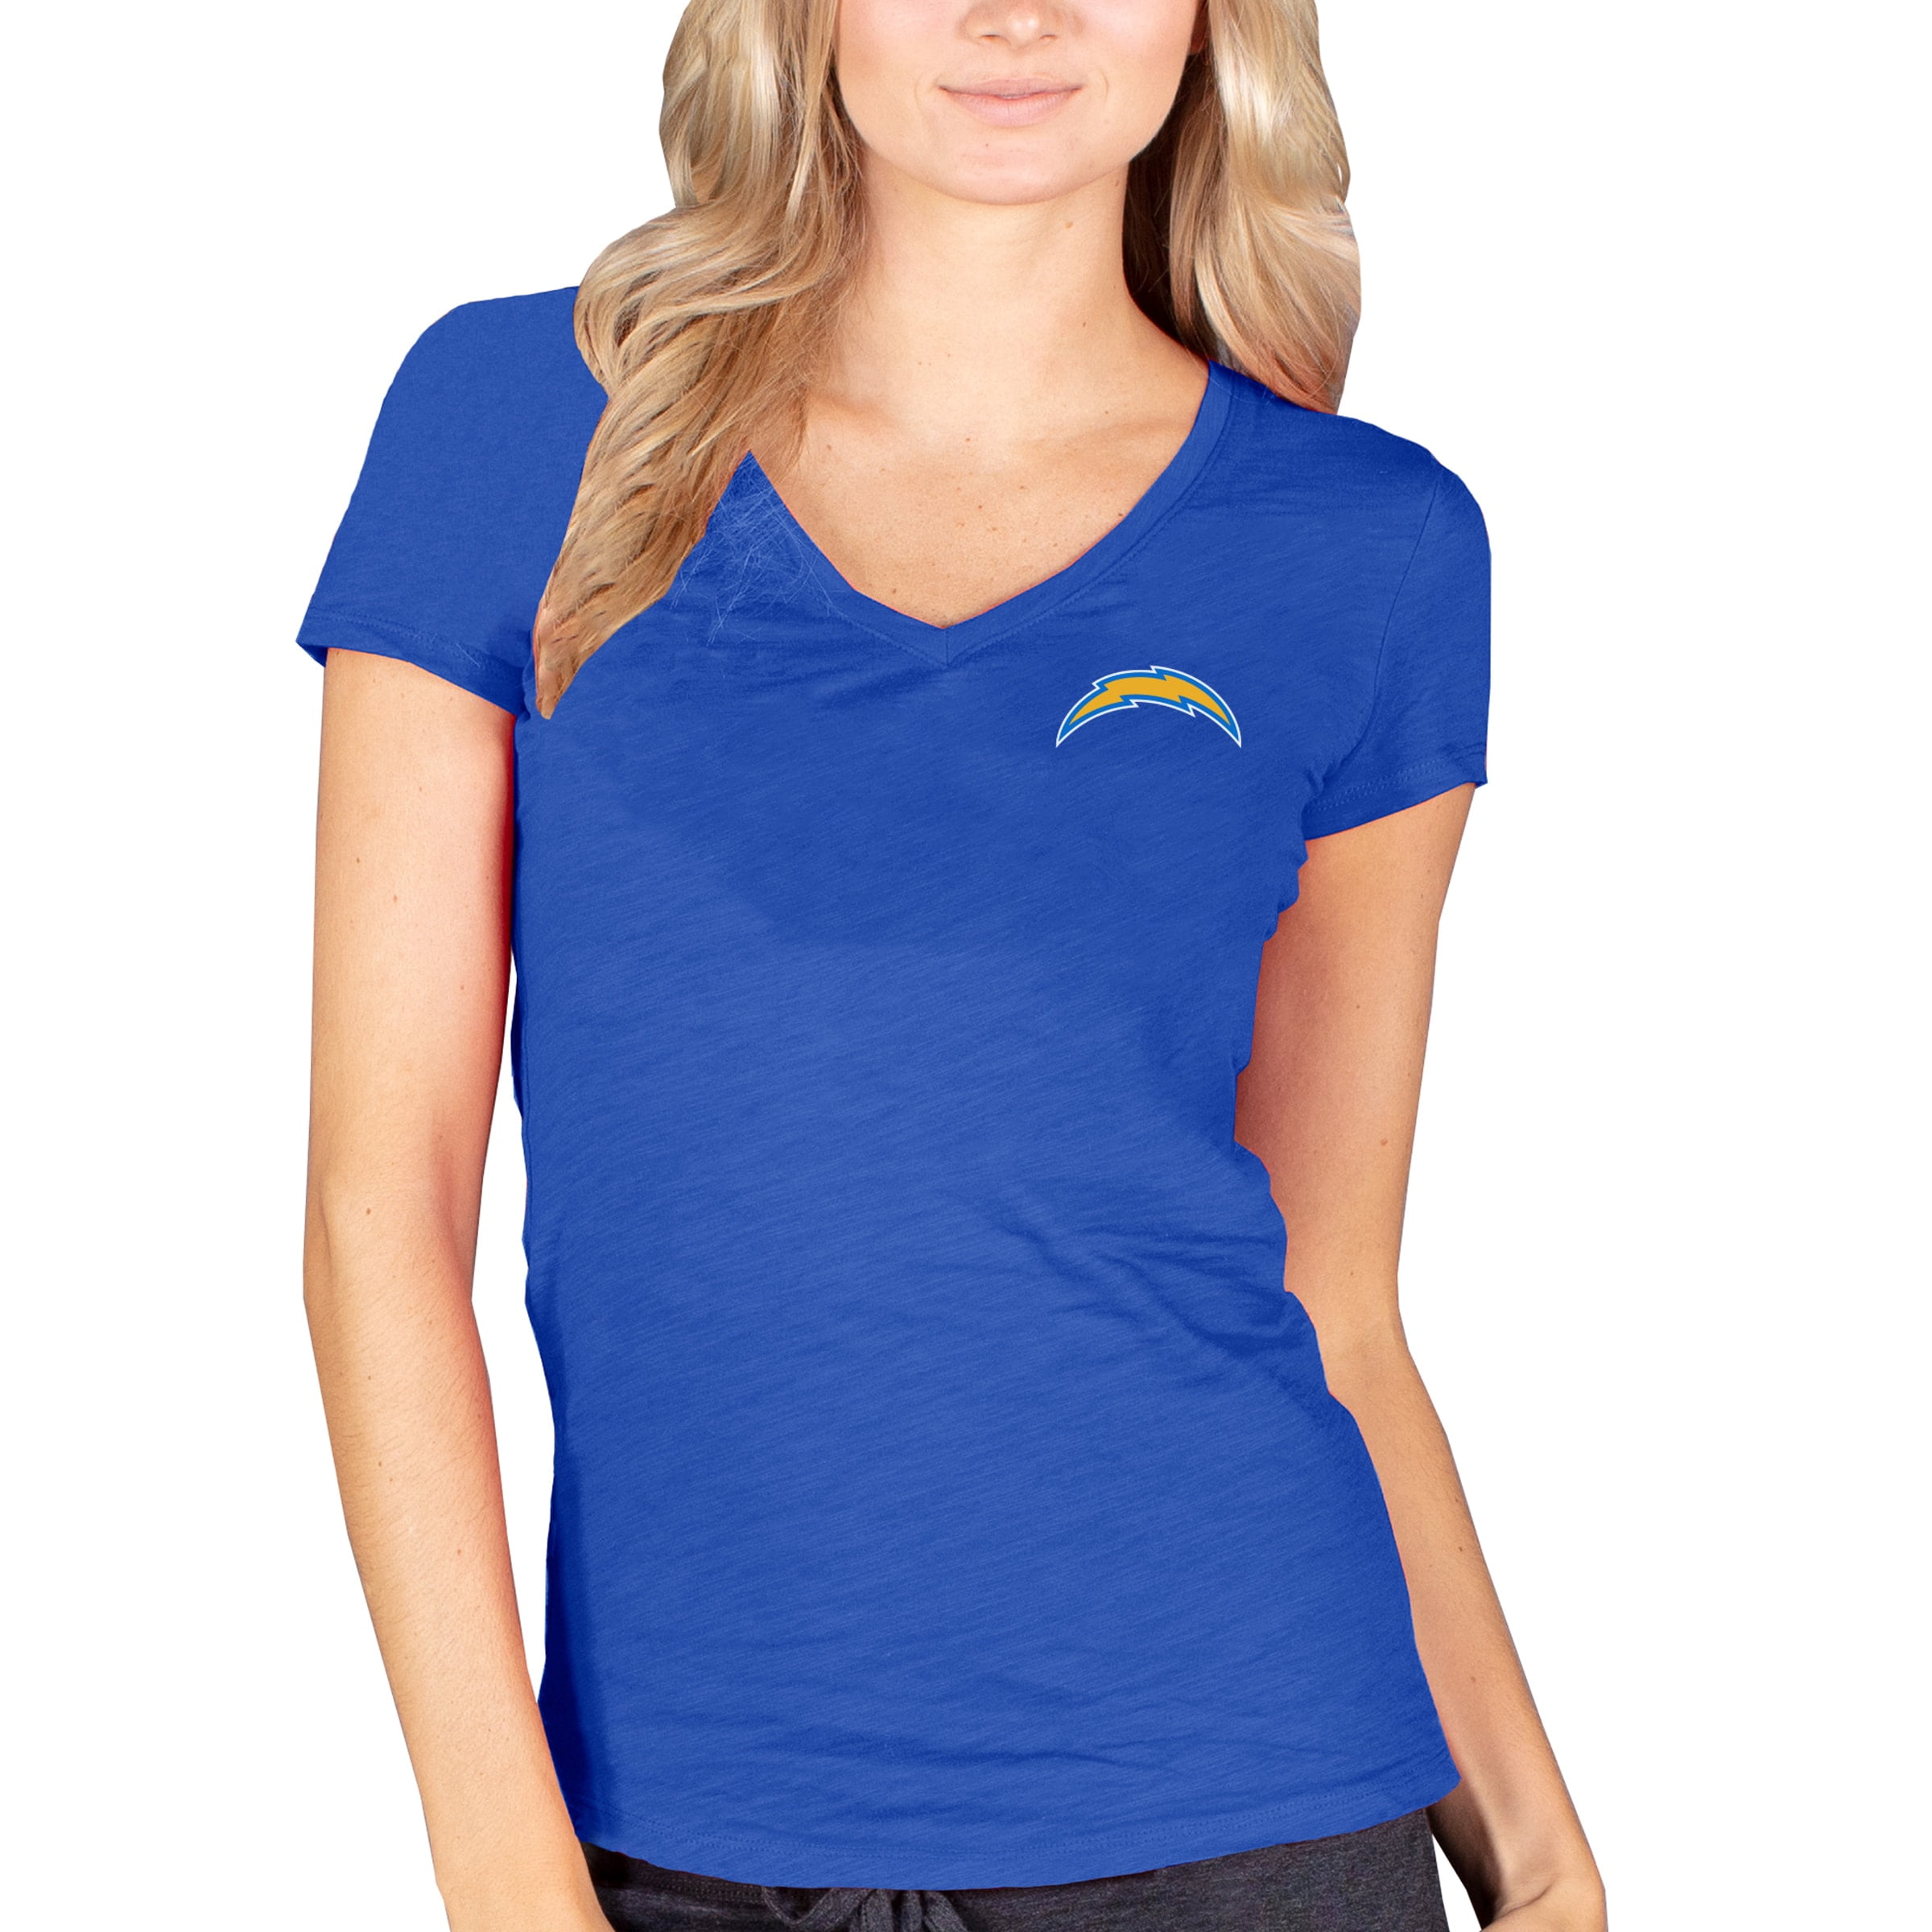 chargers women's t shirts